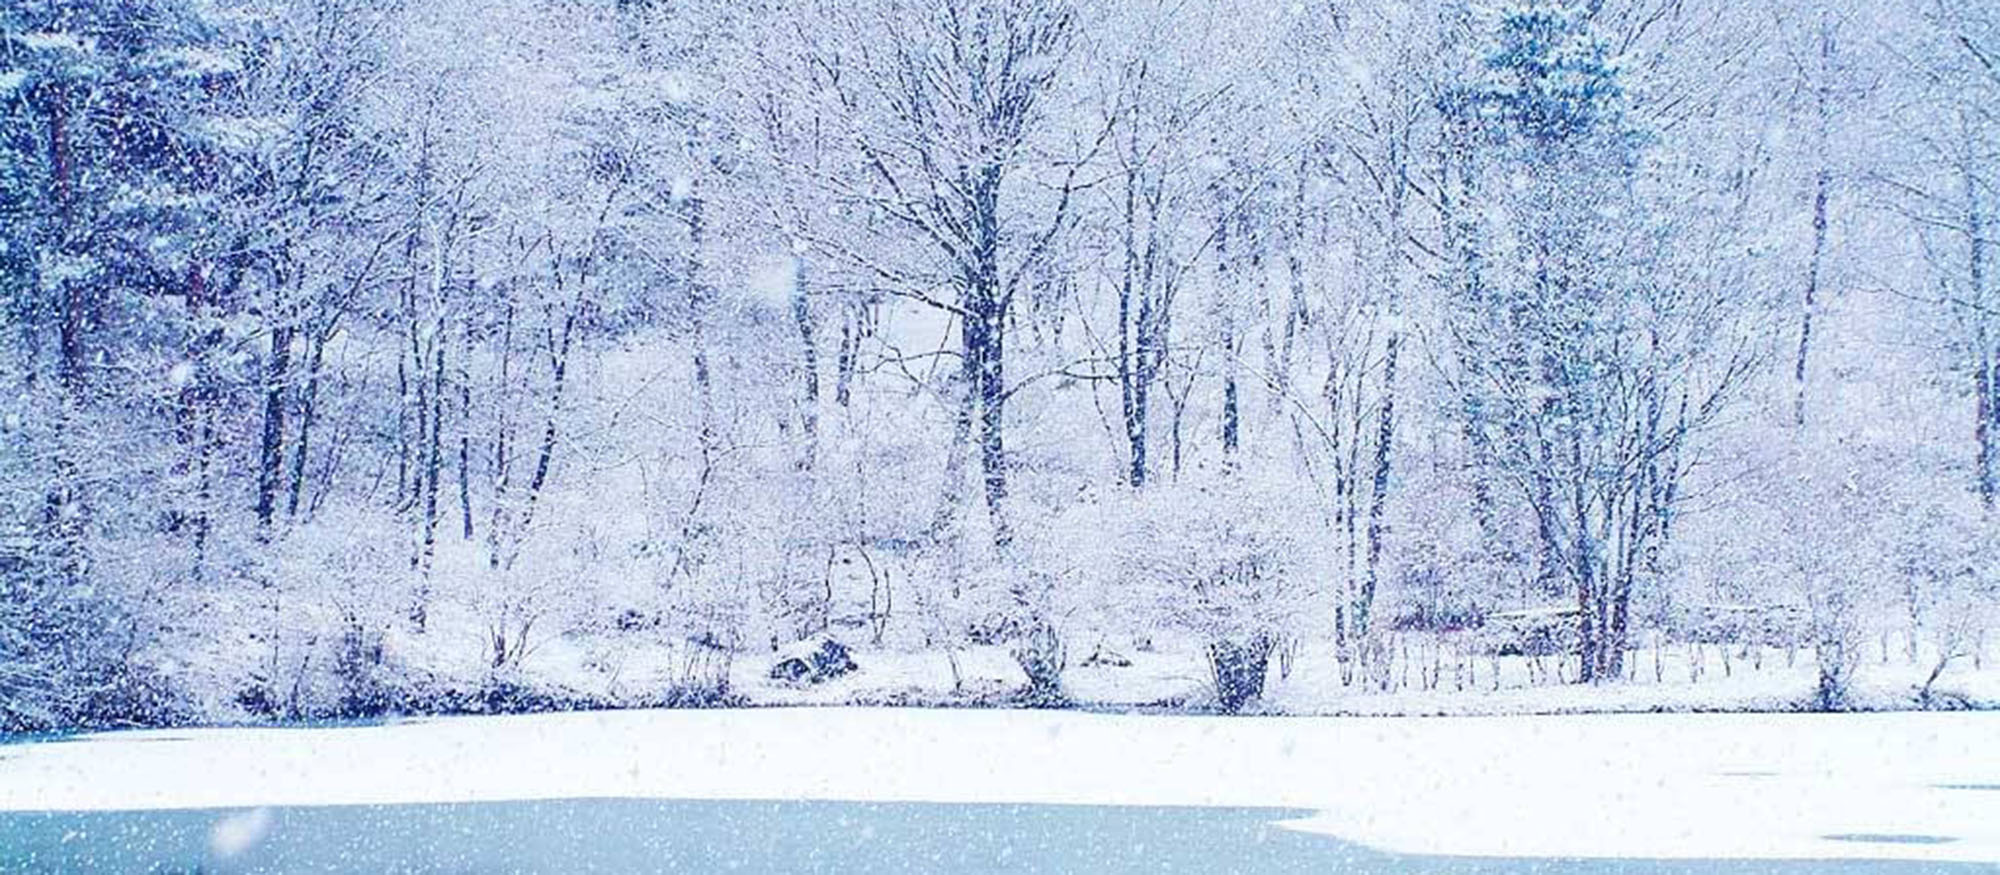 Snow covered image of a lake in winter time.